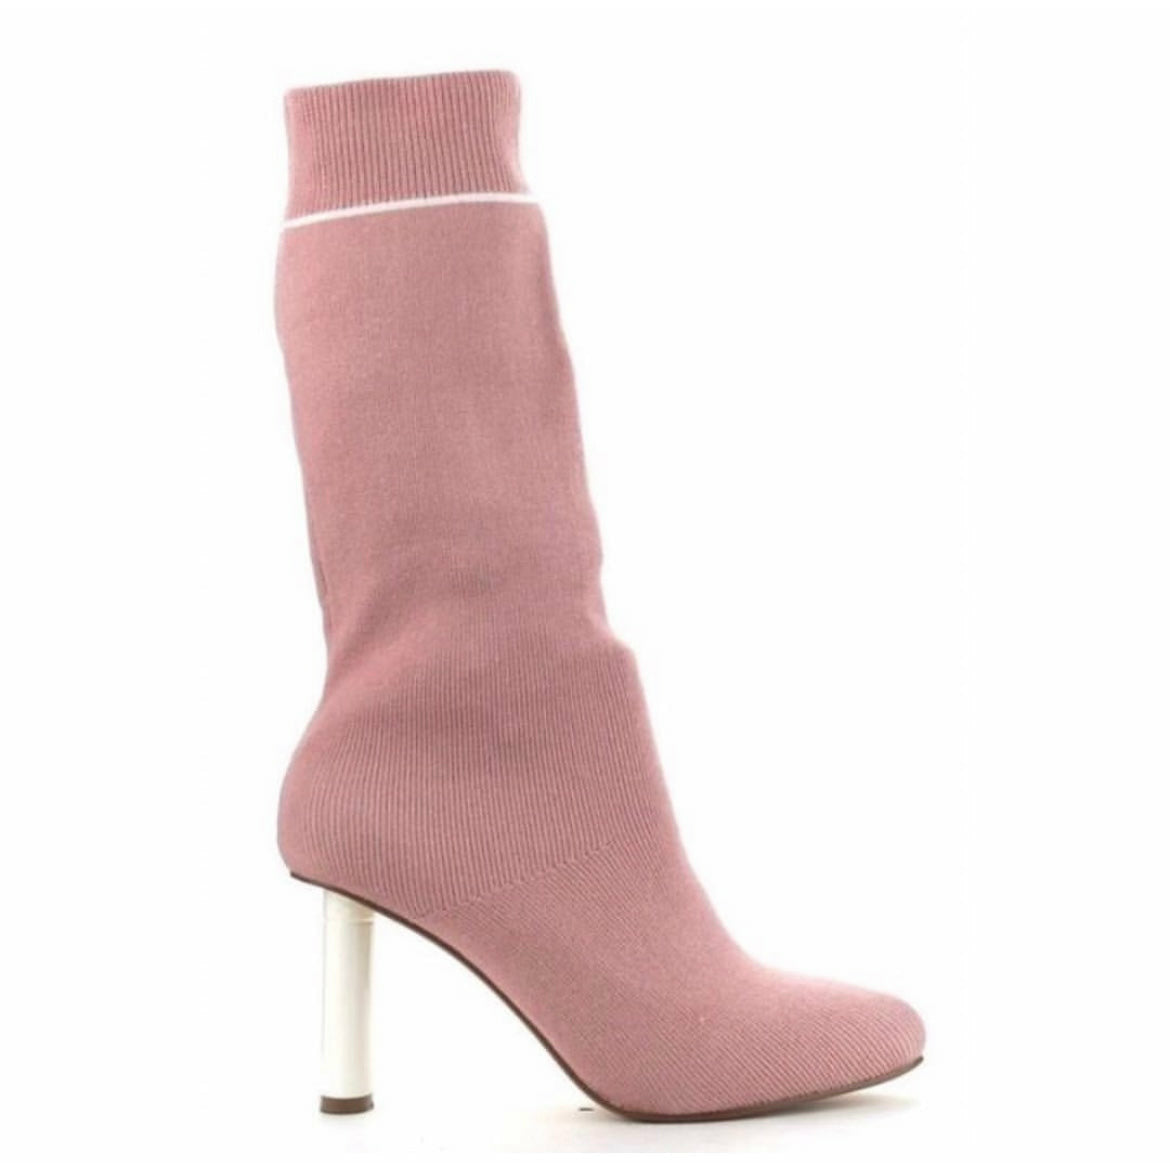 ANKLE SOCK BOOTIE WAS $69.99 NOW $29.99